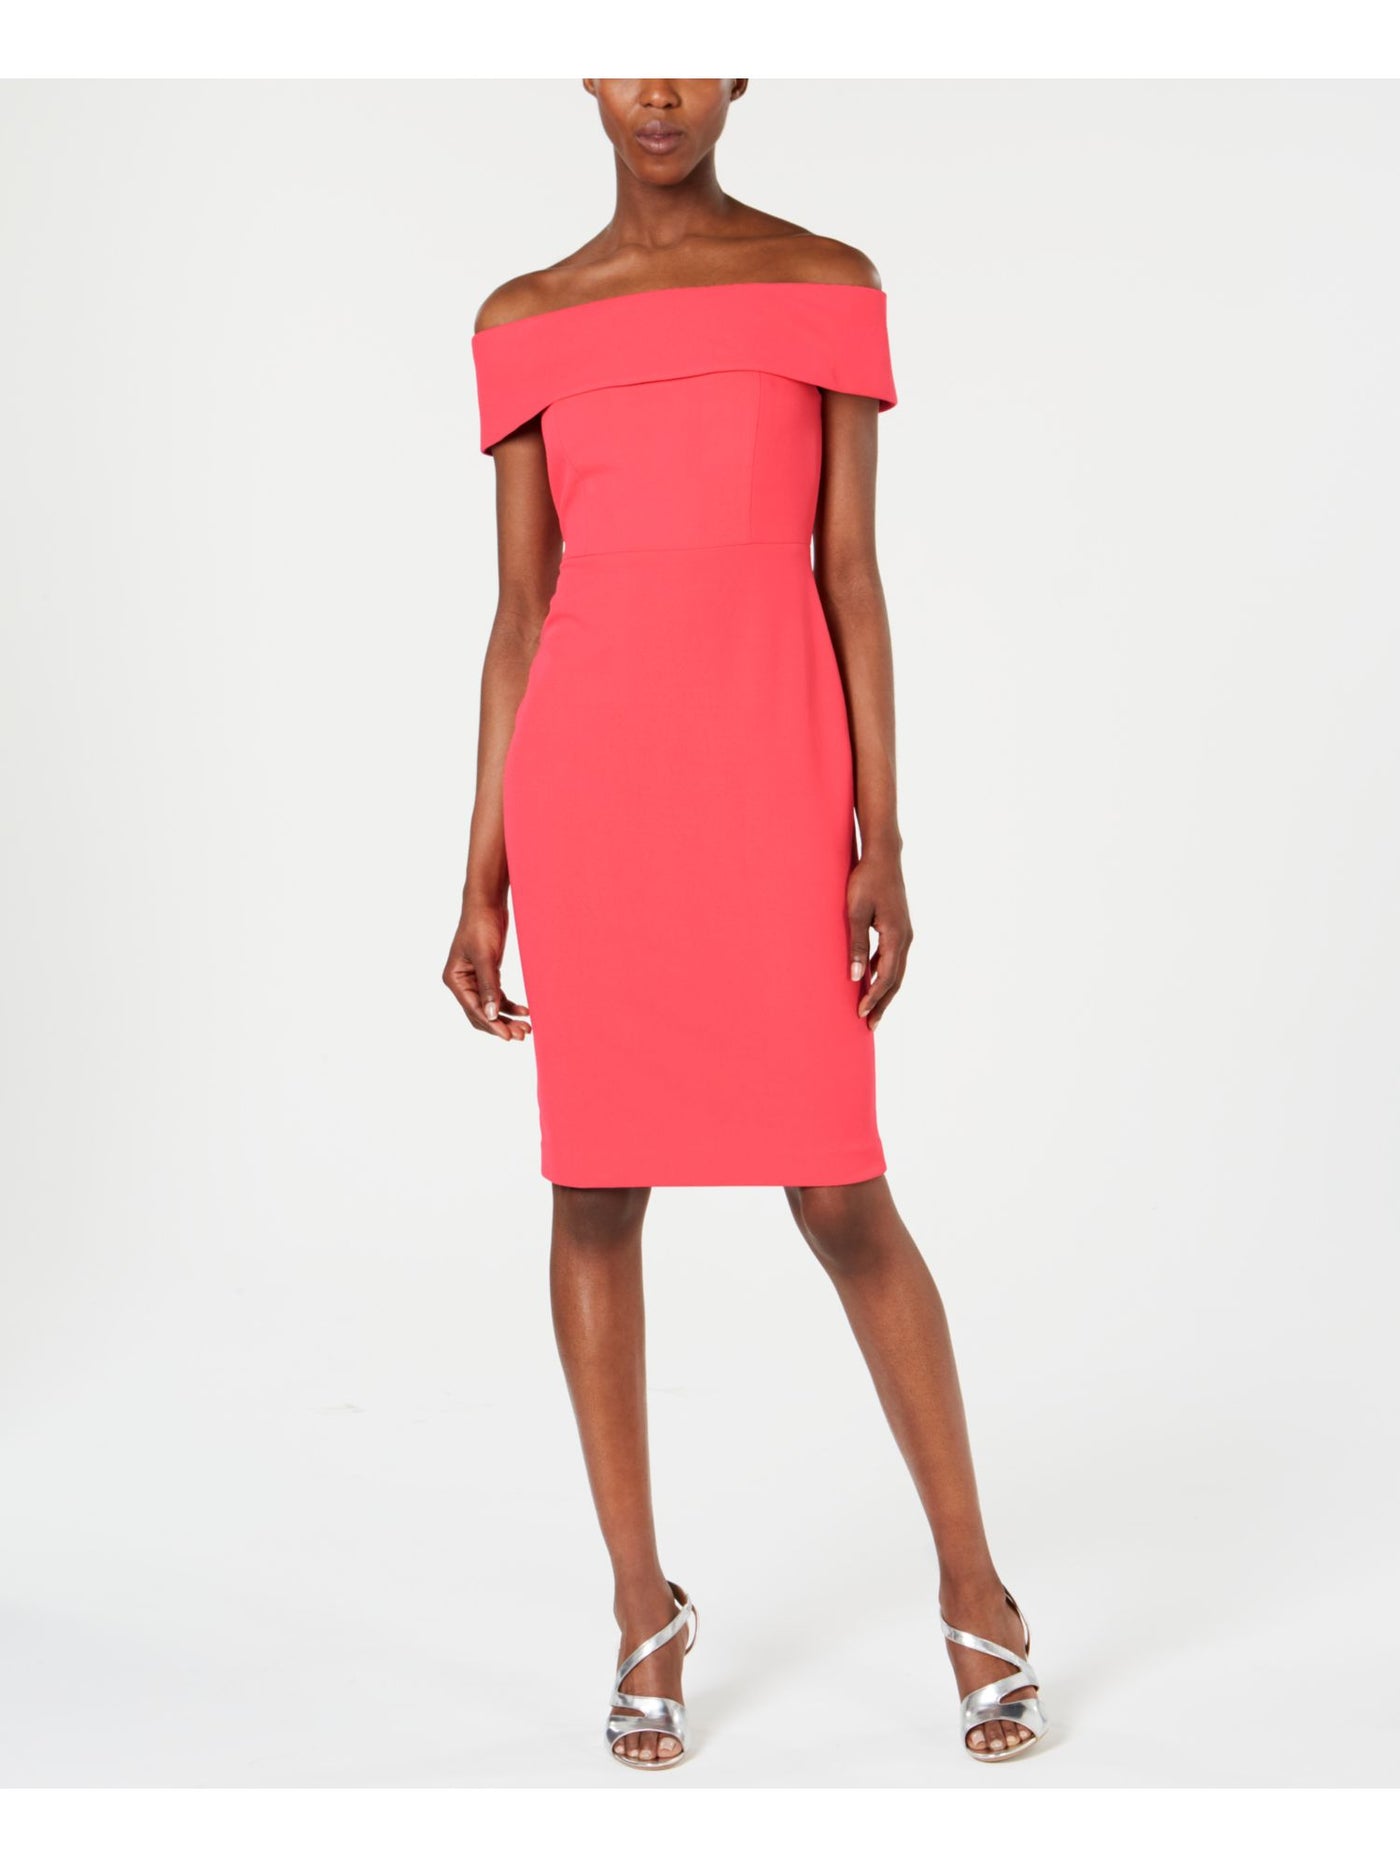 CALVIN KLEIN Womens Coral Zippered Off Shoulder Above The Knee Evening Sheath Dress Petites 10P